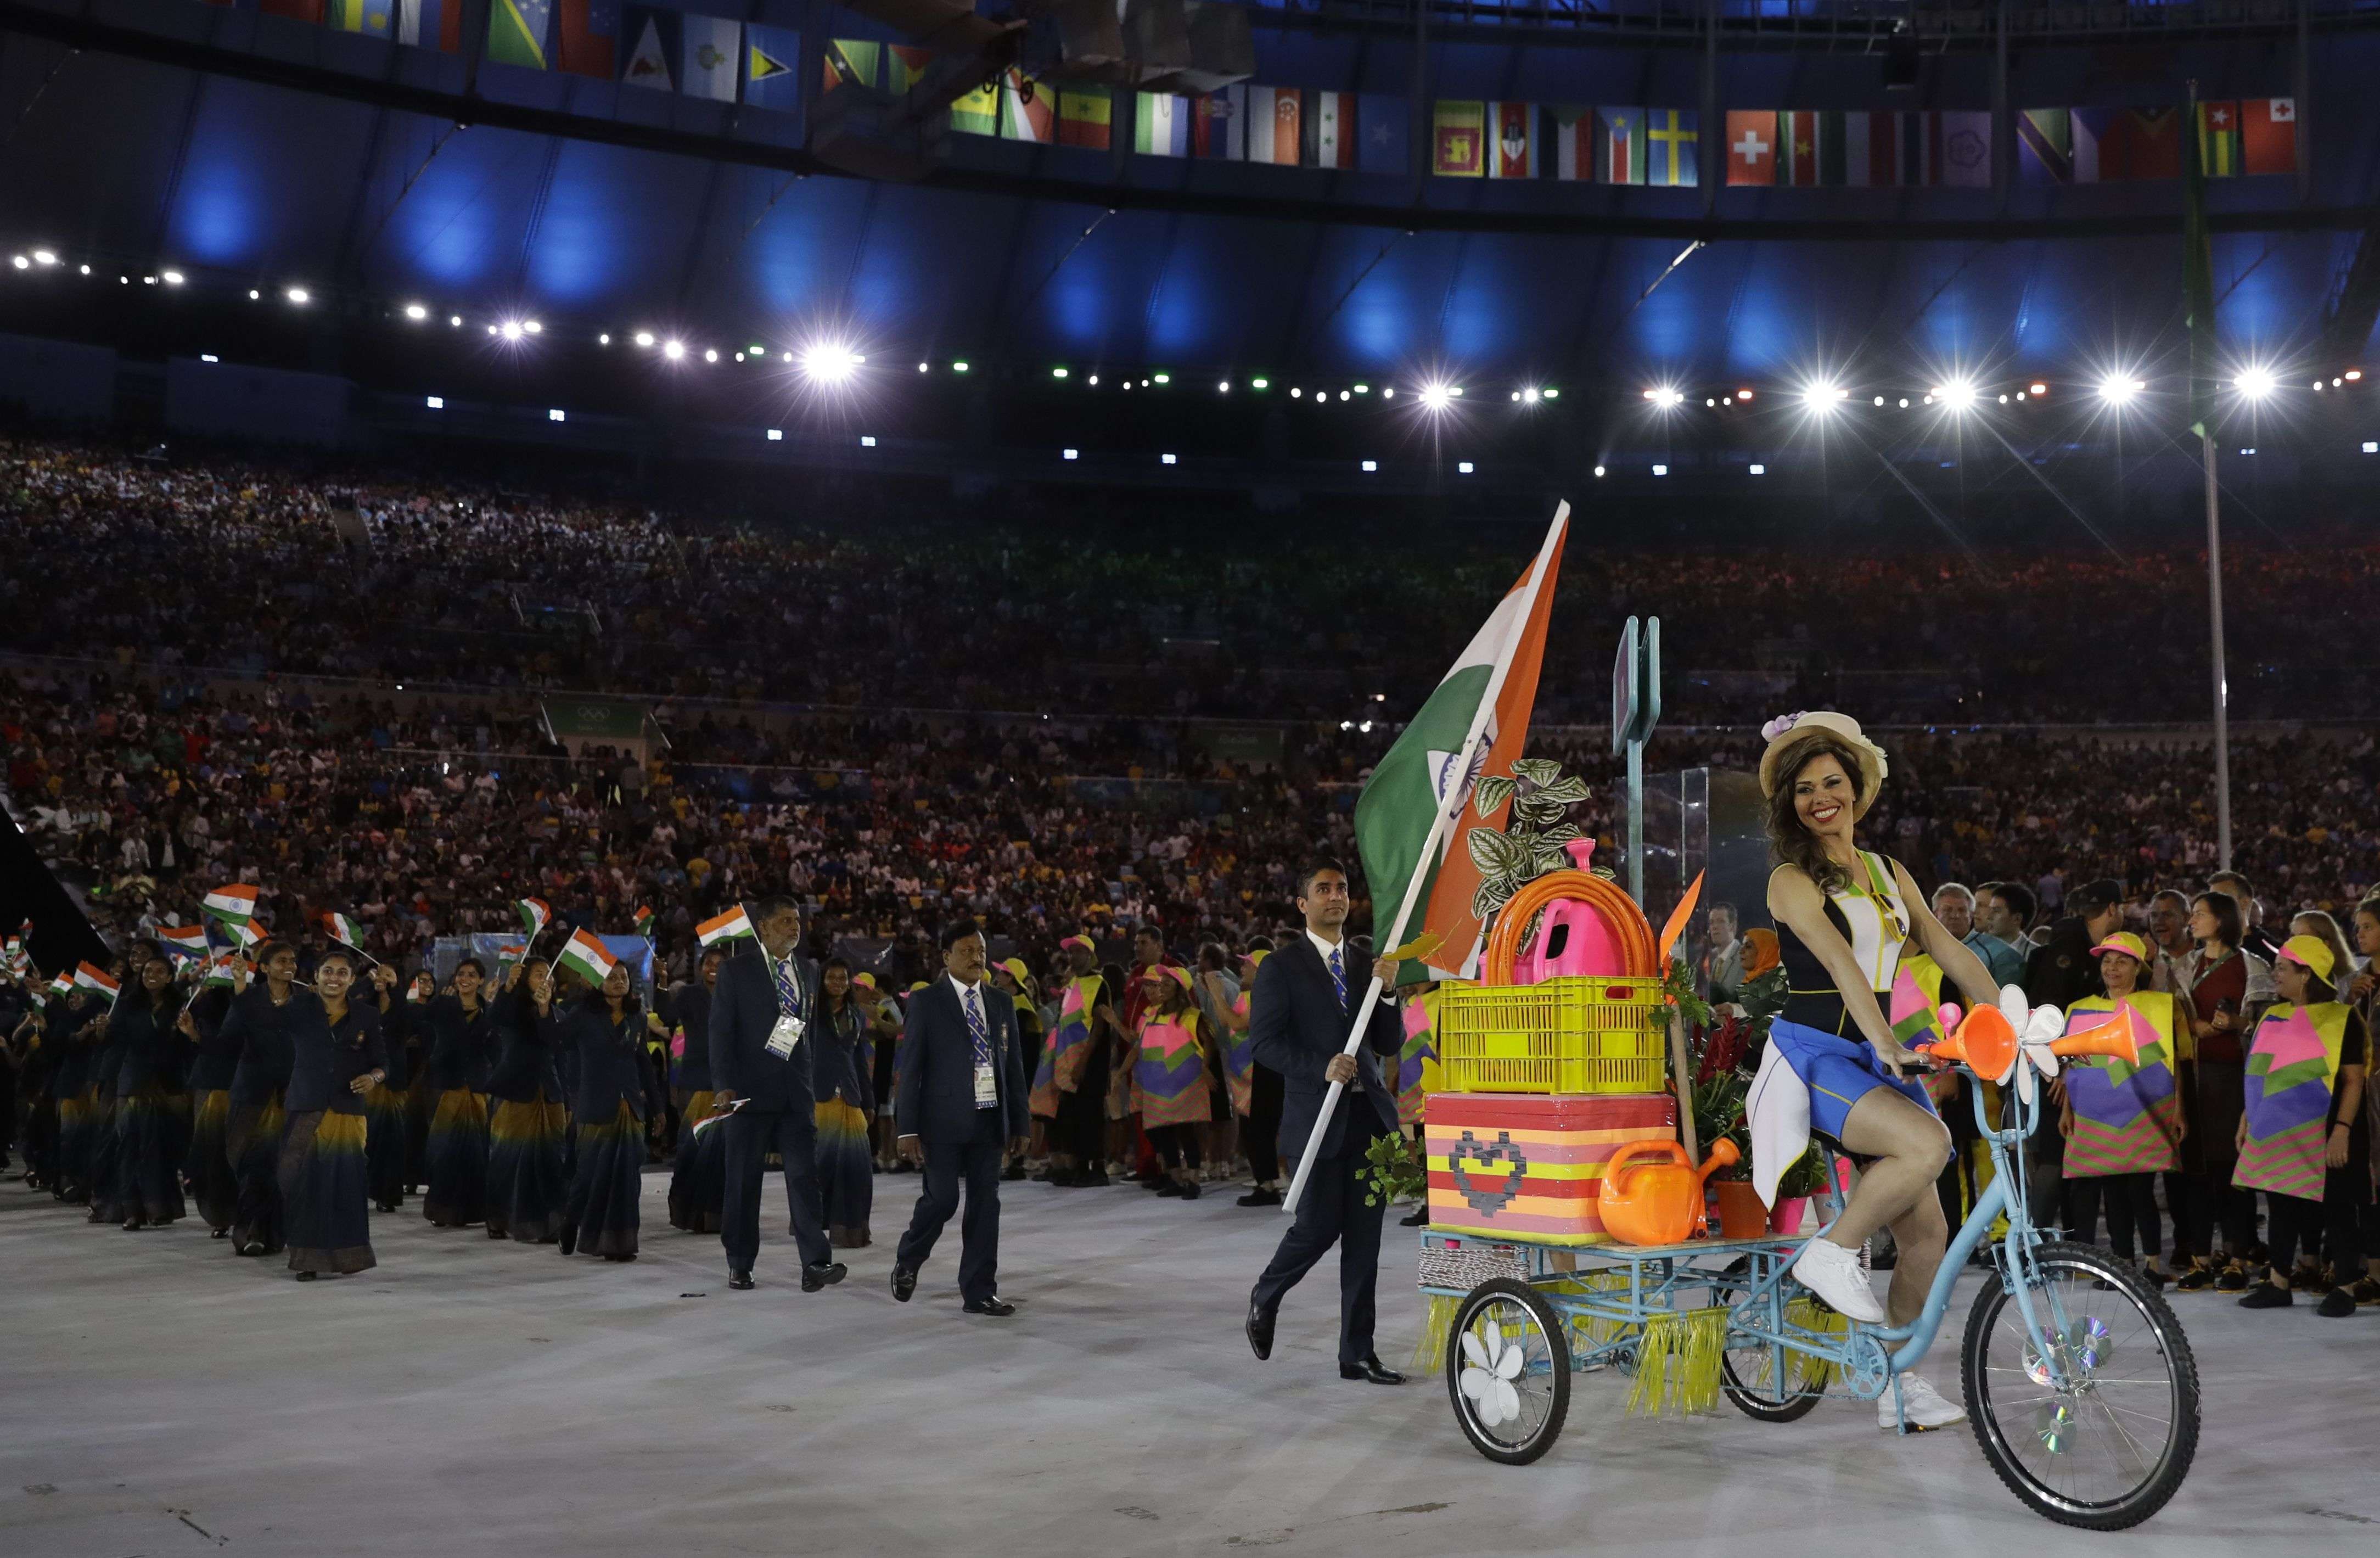 Abhinav Bindra carries the flag of India during the opening ceremony for the 2016 Summer Olympics in Rio de Janeiro, Brazil, Friday, Aug. 5, 2016. (AP Photo/David J. Phillip)